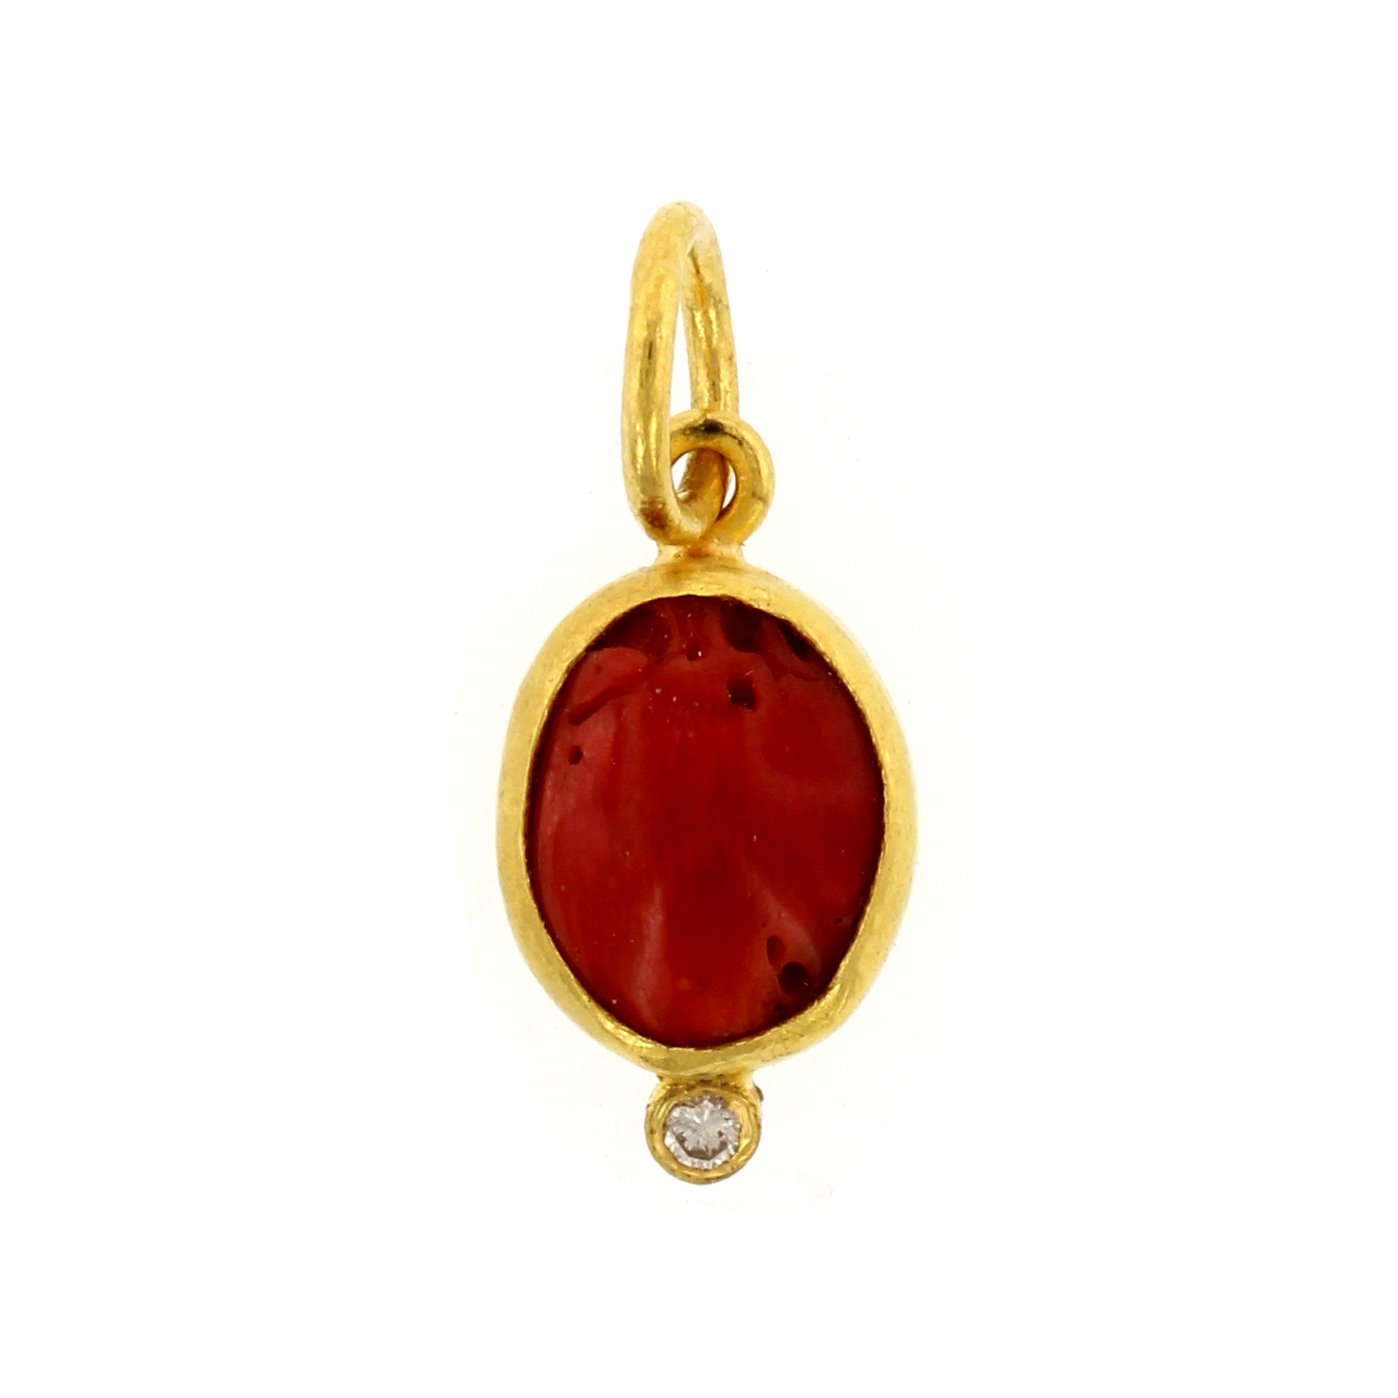 24K Yellow Gold Oval Coral Charm